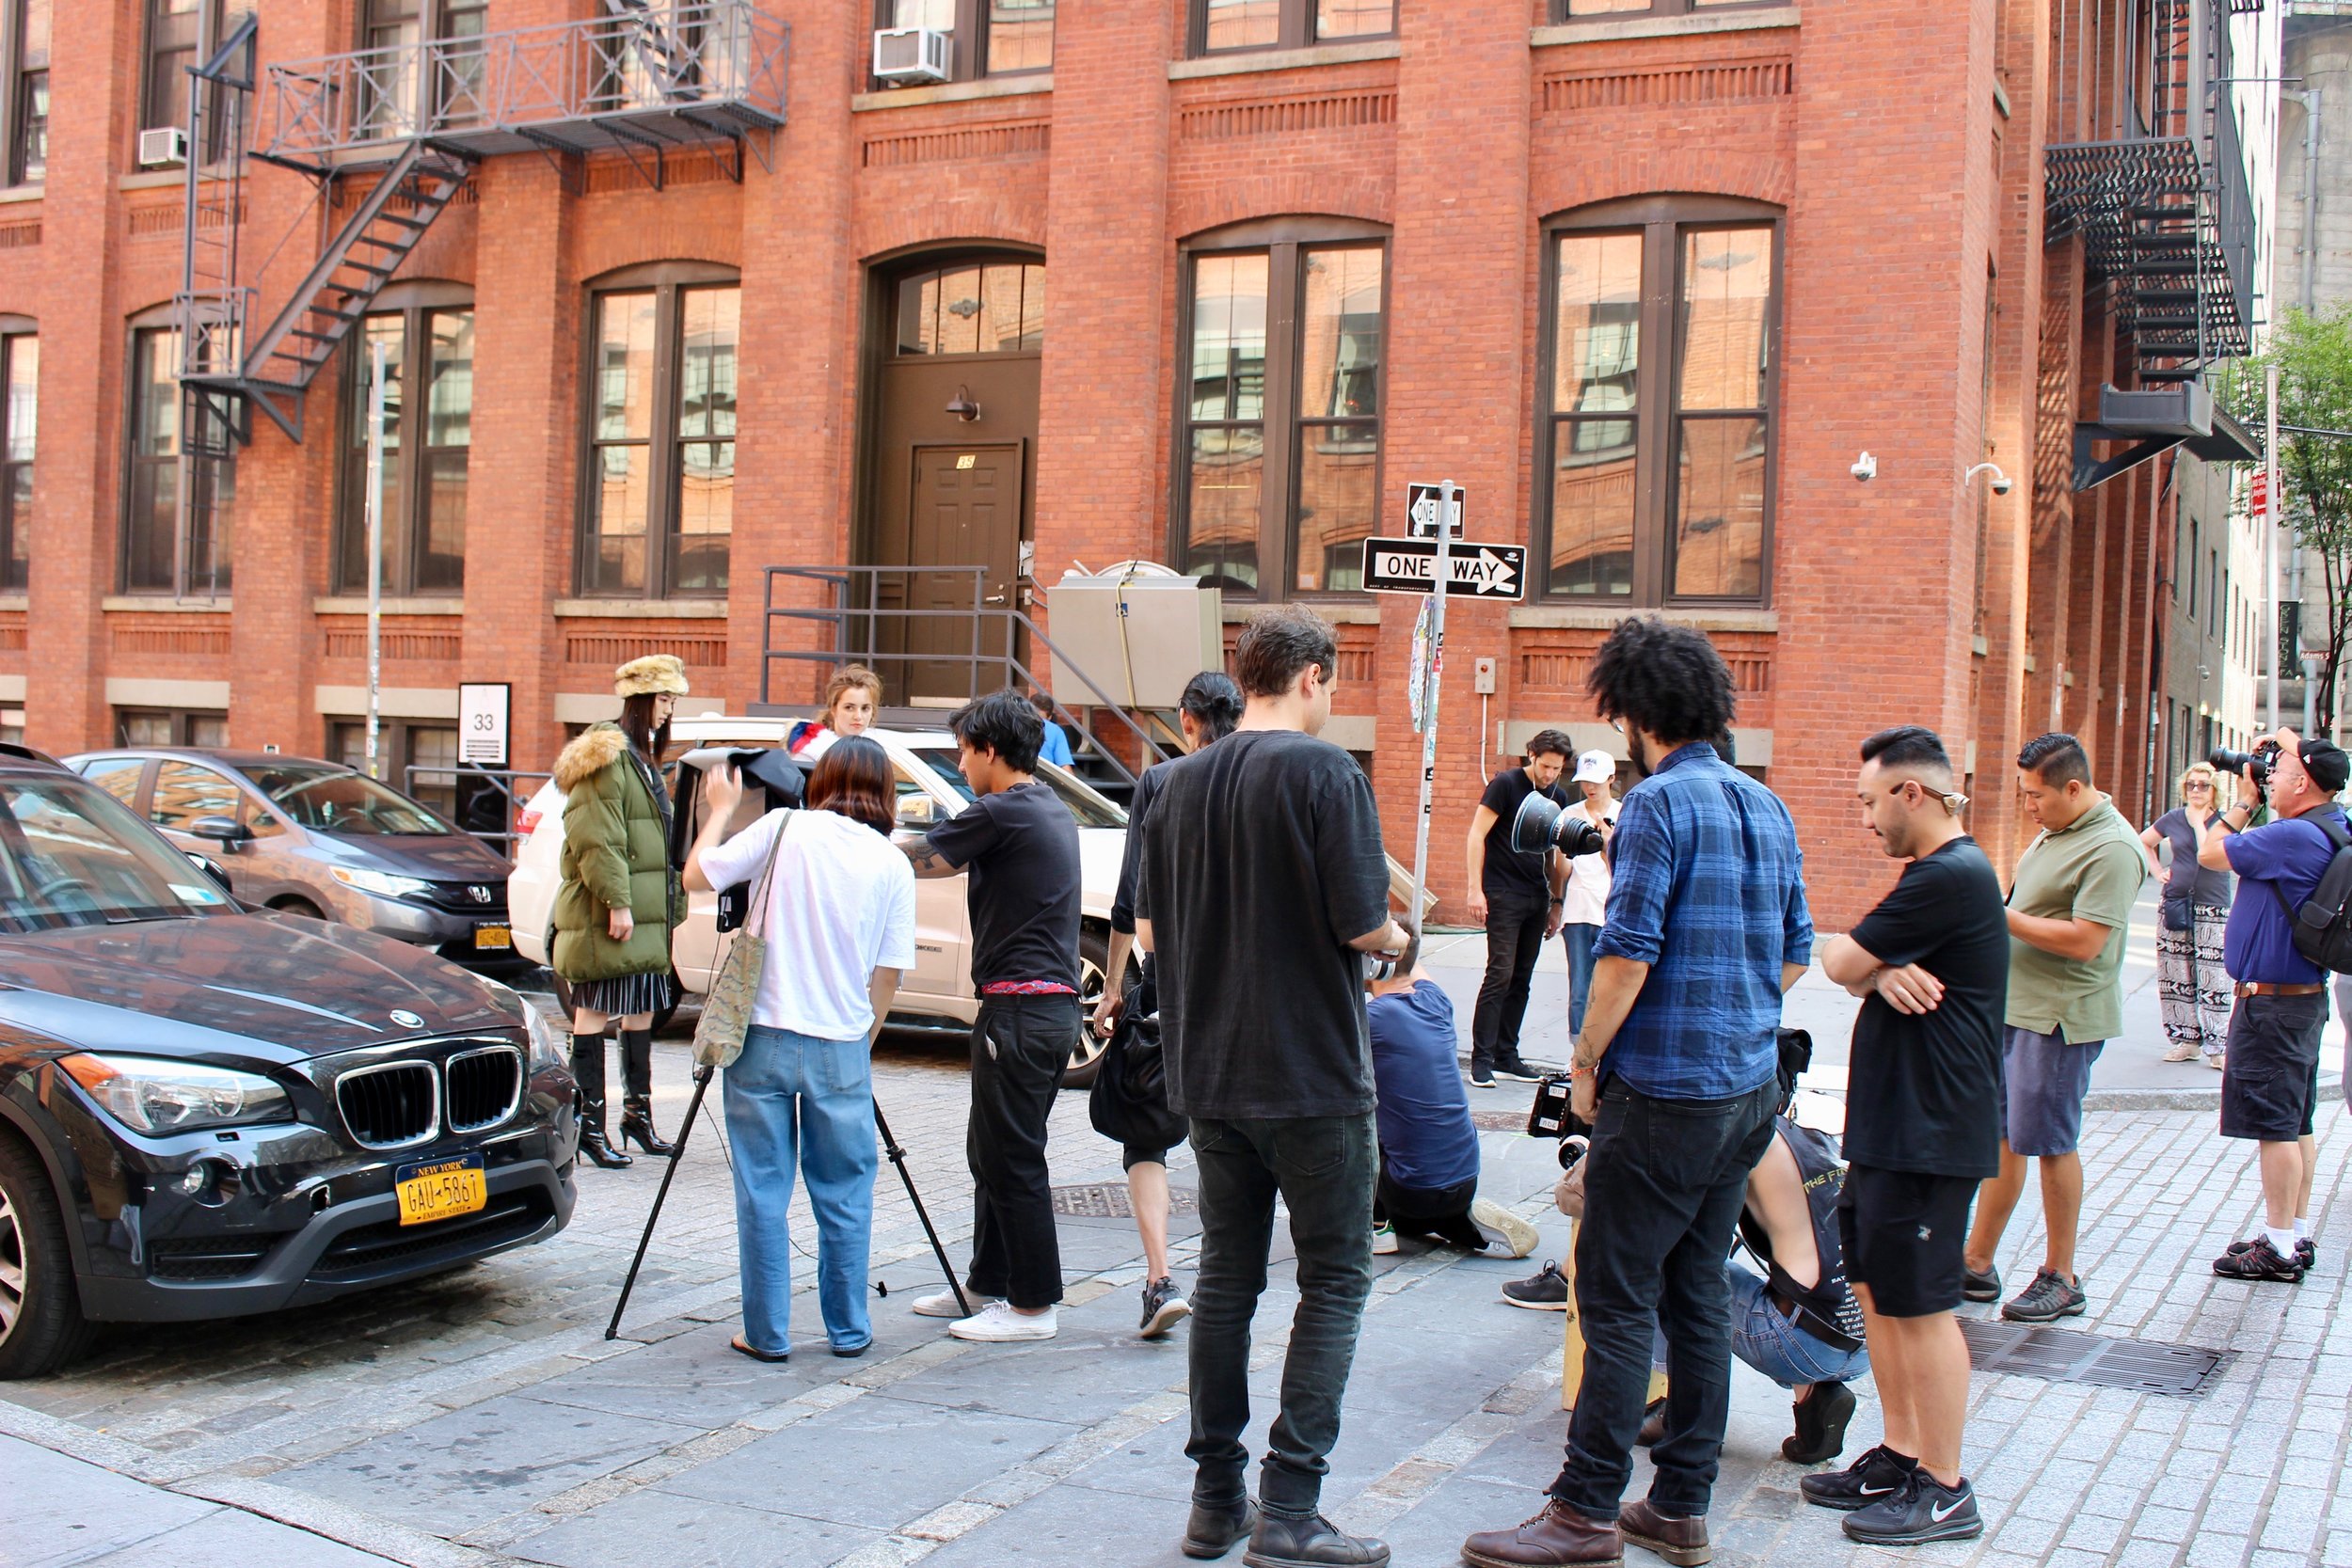  Typical every-day DUMBO pandemonium.&nbsp; This scene is very common on Washington Street at the corner of Water and Washington.&nbsp; It is a fashion photo shoot.&nbsp; Photographers are facing west towards an iconic DUMBO view.&nbsp; See the next 